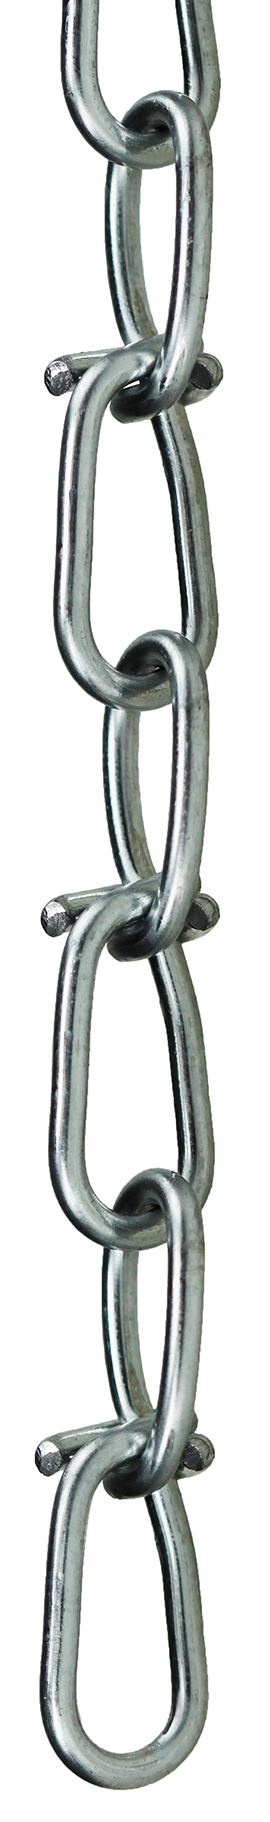 Double Loop Jack Chain, #3 Size, 100 ft. length, 0.080 in. diameter, Steel material, Zinc Plated Finish, 90 lb. working load limit